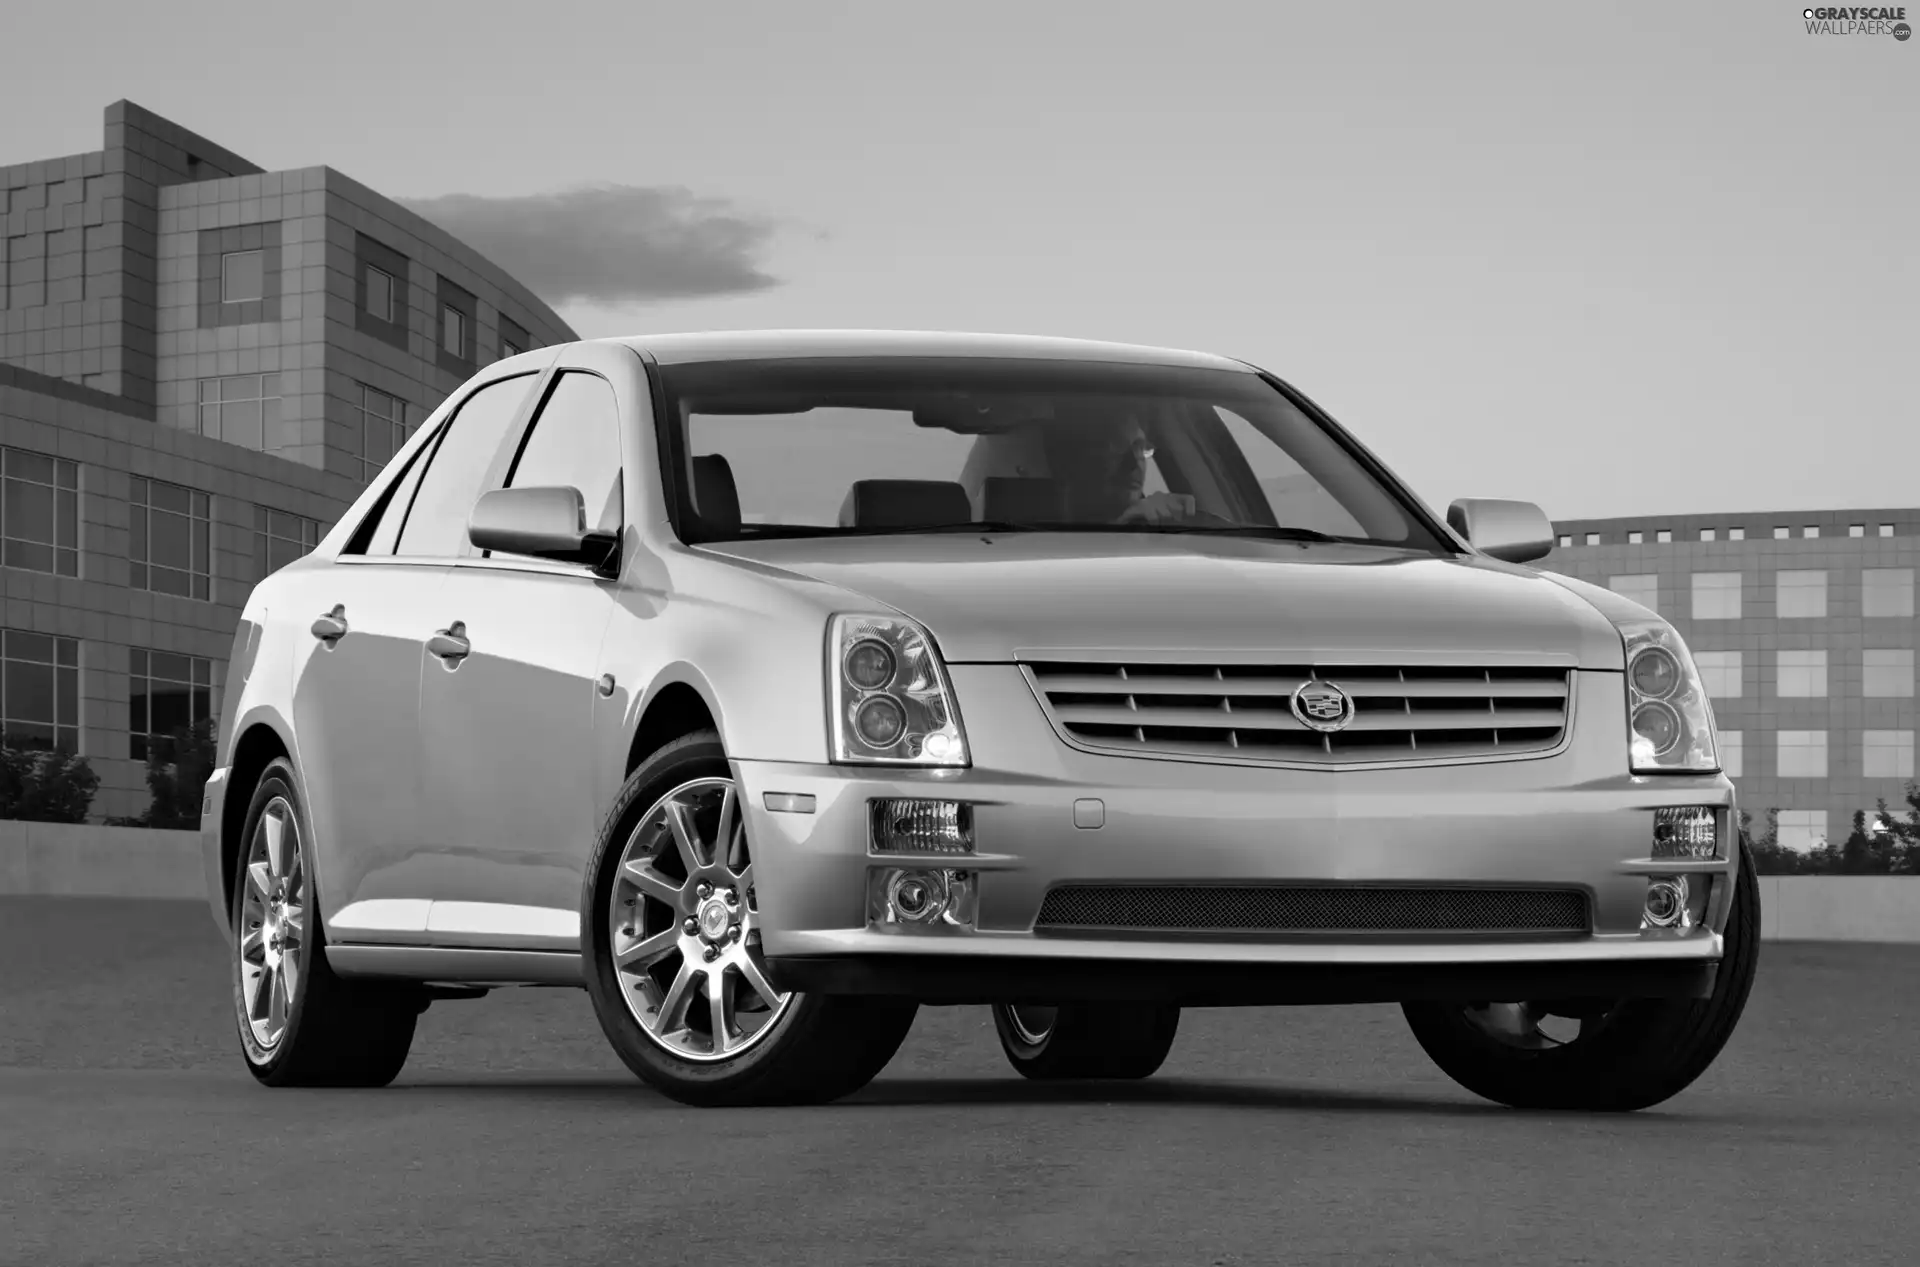 Cadillac STS, commercial